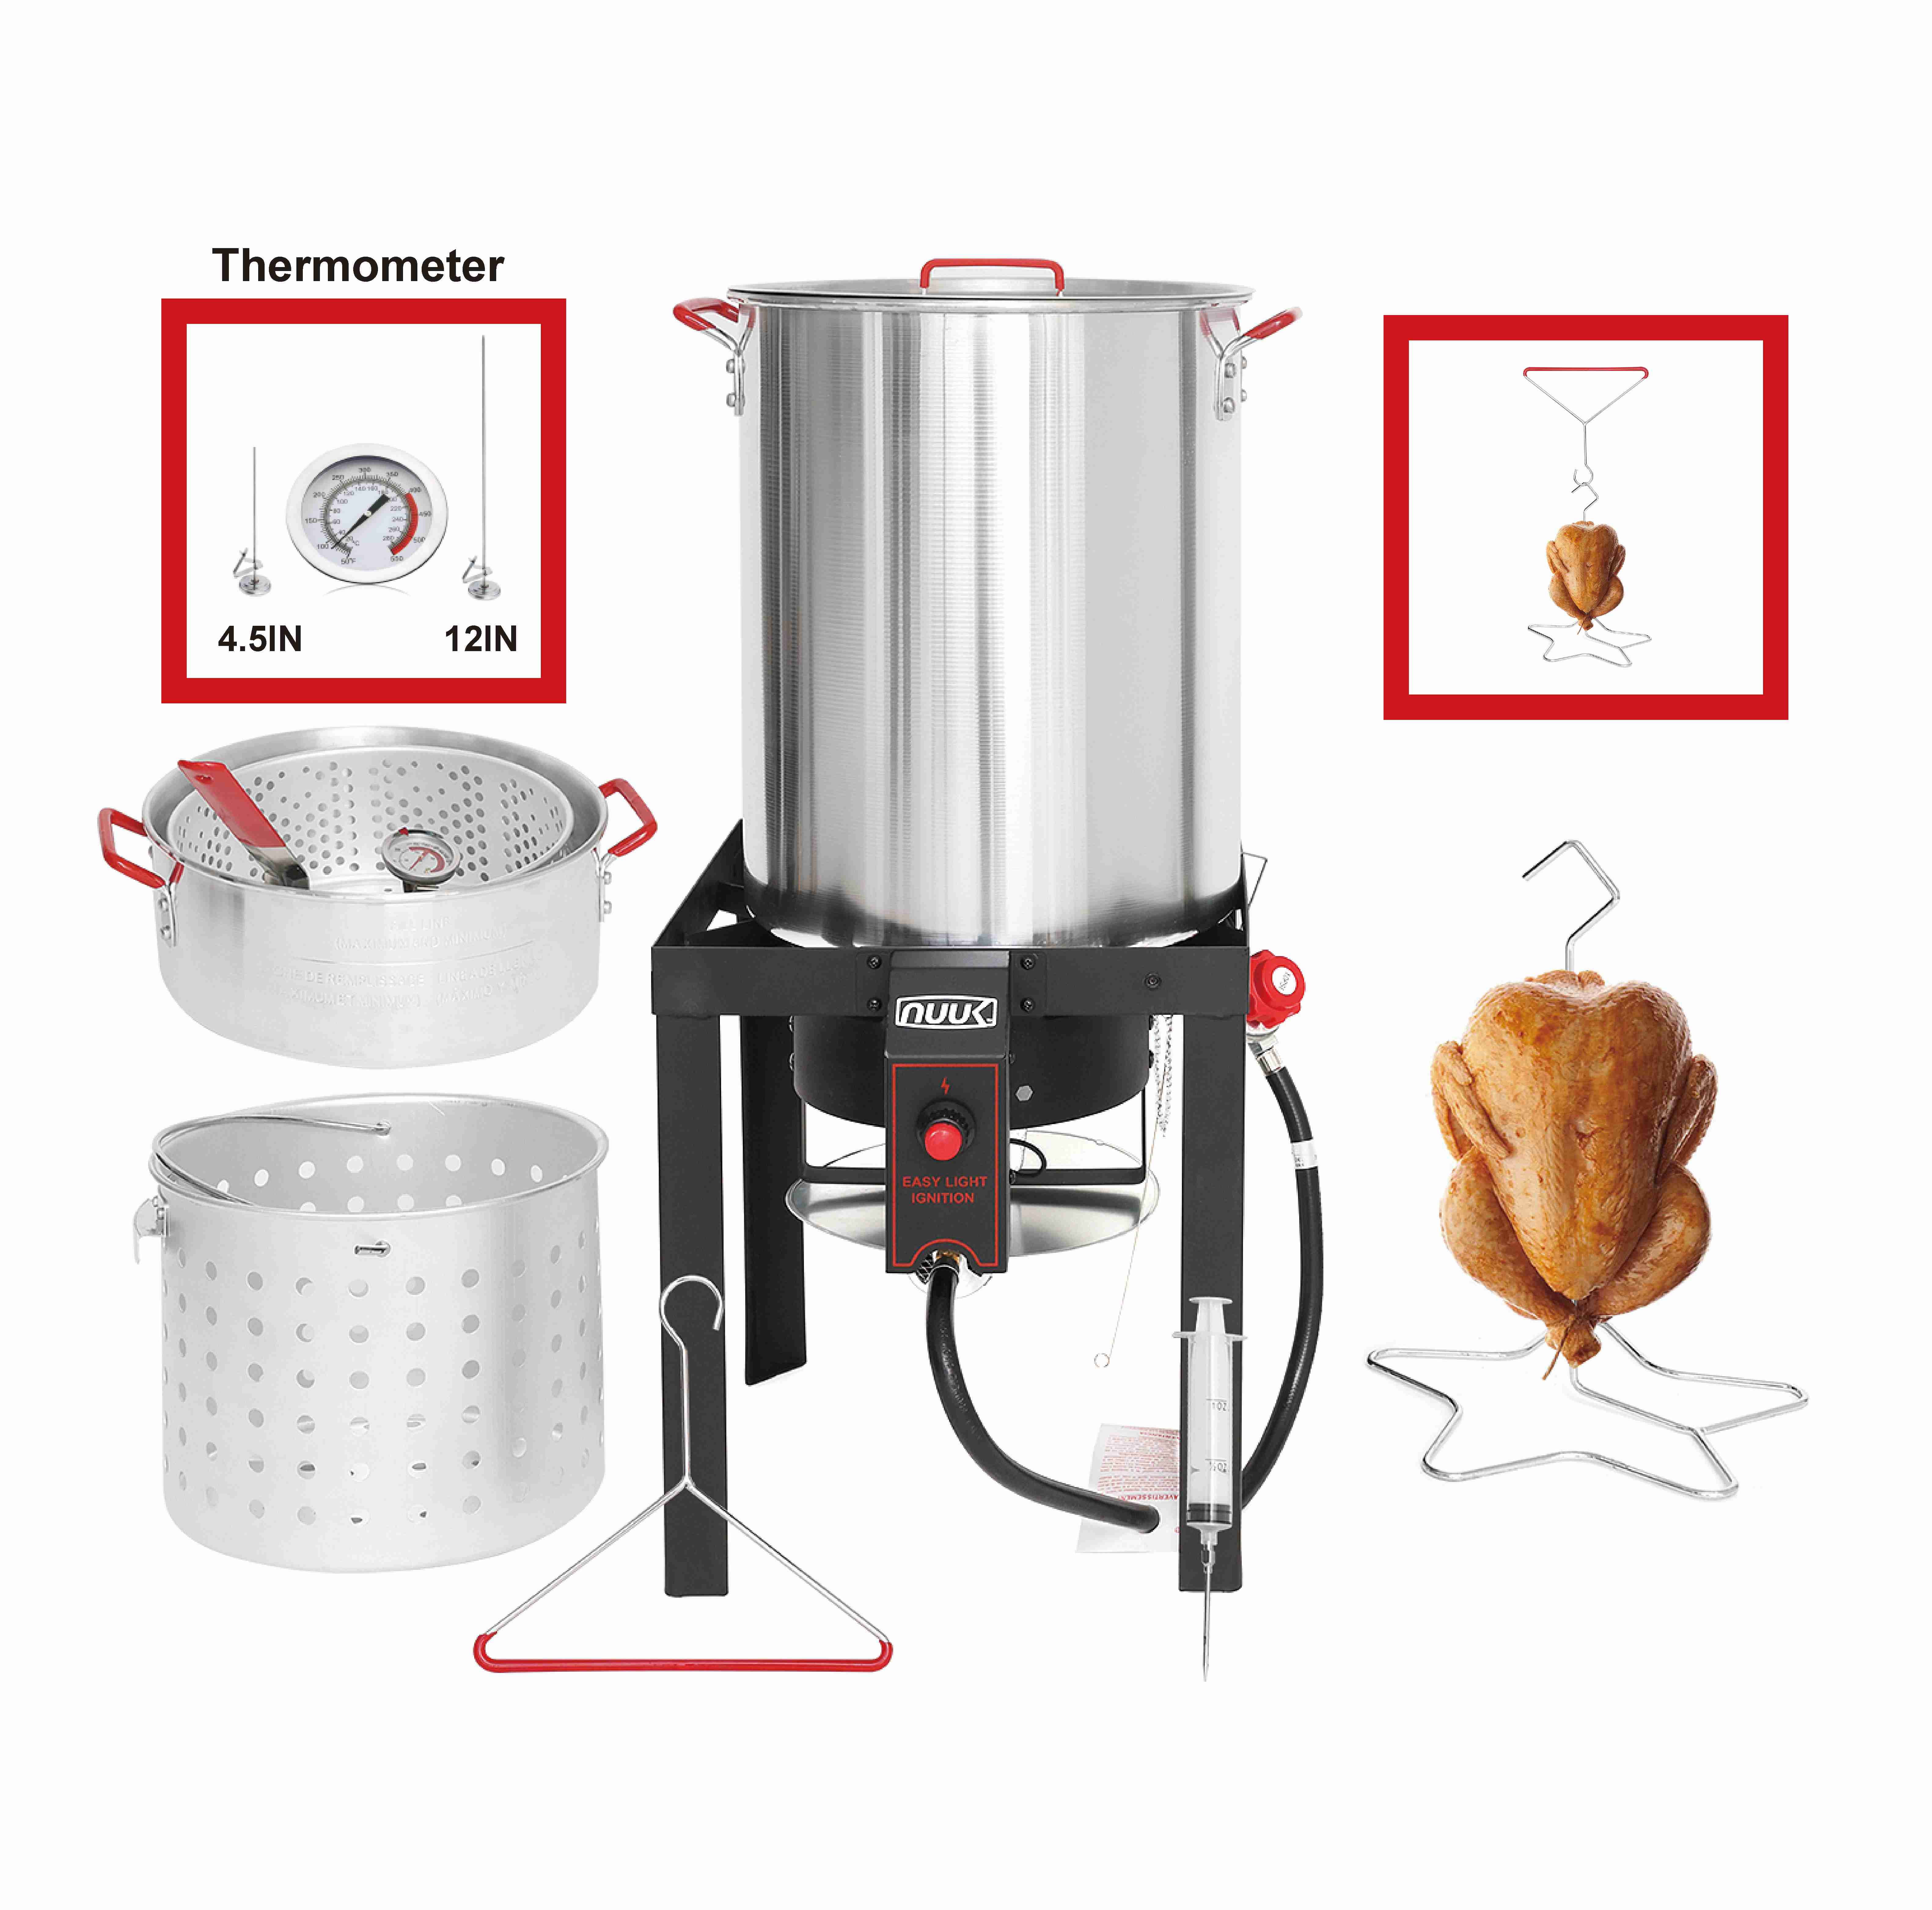 OuterMust Propane Turkey Fryer with Burner Set OuterMust